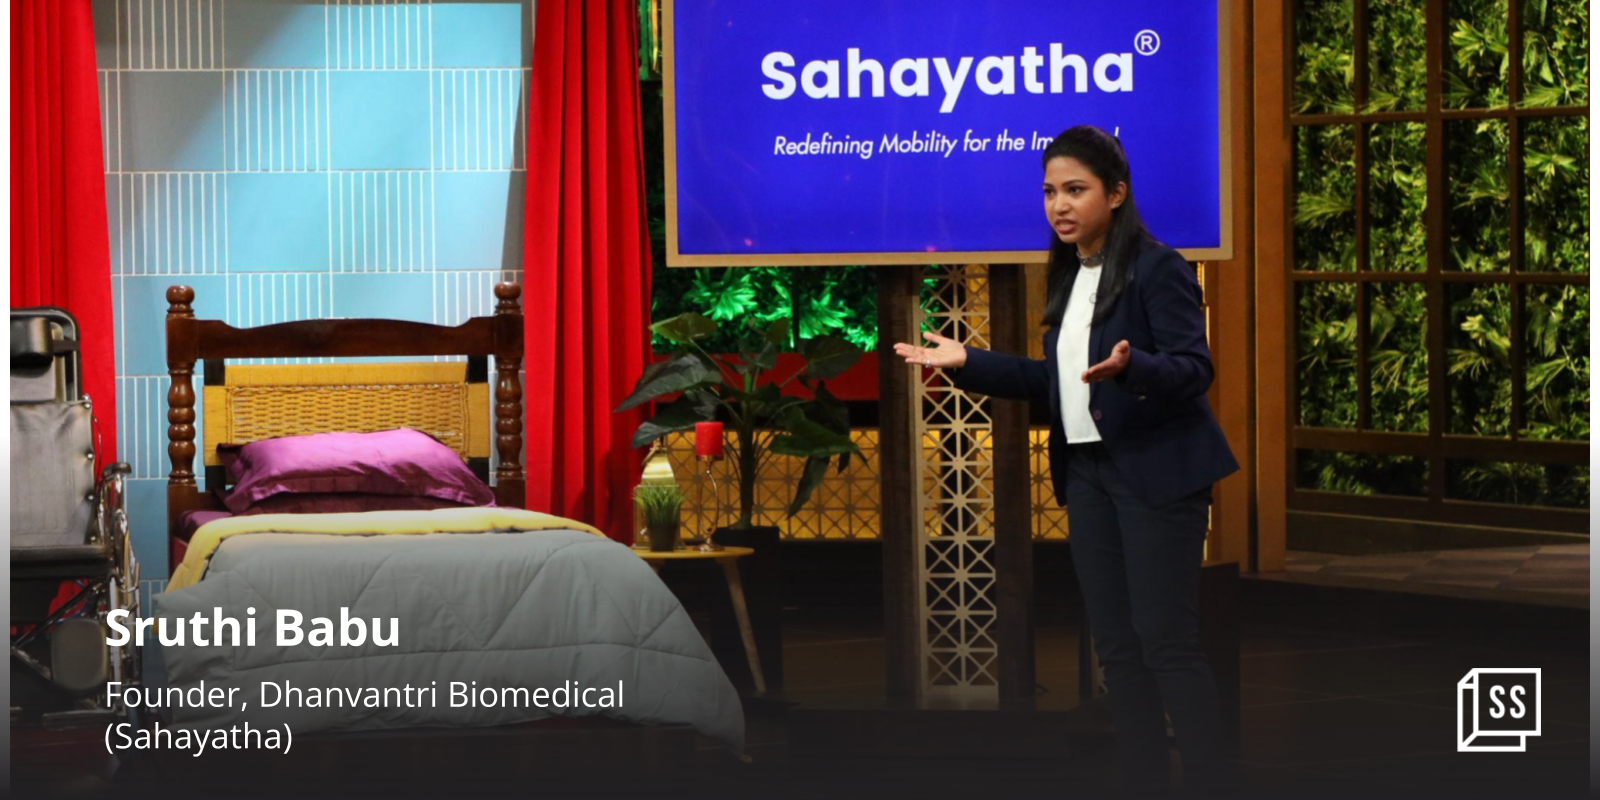 This innovator’s smart wheelchair with assistive cleaning device won Rs 1 Cr funding on Shark Tank India